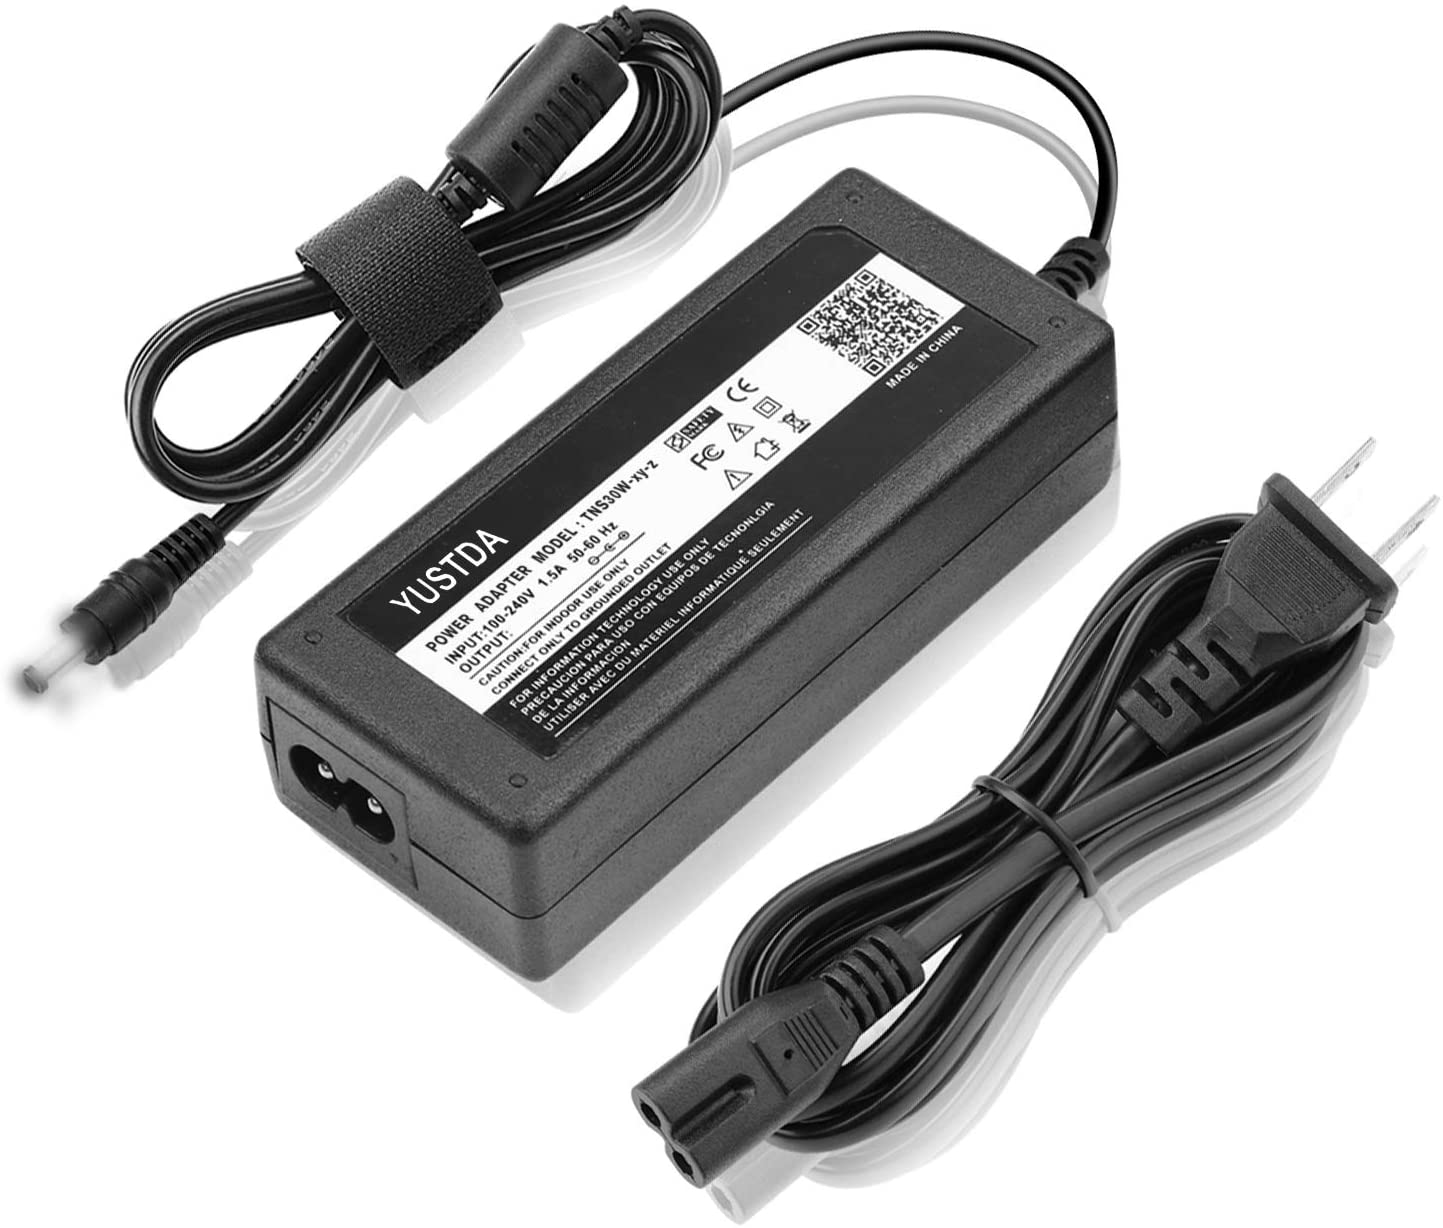 12V AC/DC Adapter Replacement For Cisco TelePresence SX20 Codec TTC7-21 CTS SX20N LITEON PWR-60W-AC PWR-60W-SX-AC Delta EADP-60KB B EADP-60KBB GPE GPE602-120500D GPE602-1205000 5A 60W Power - image 1 of 5